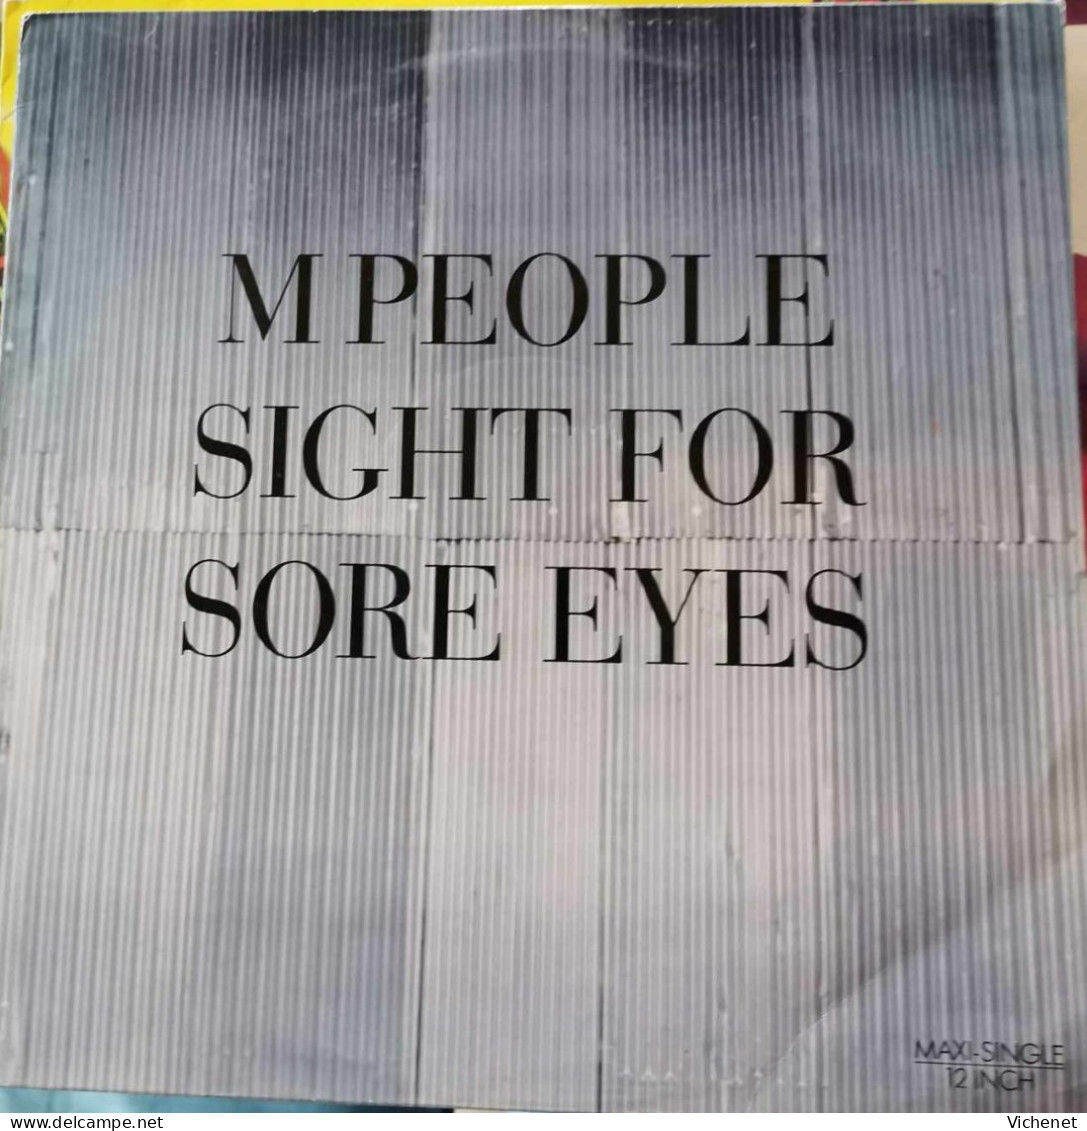 M People – Sight For Sore Eyes - Maxi - 45 T - Maxi-Single